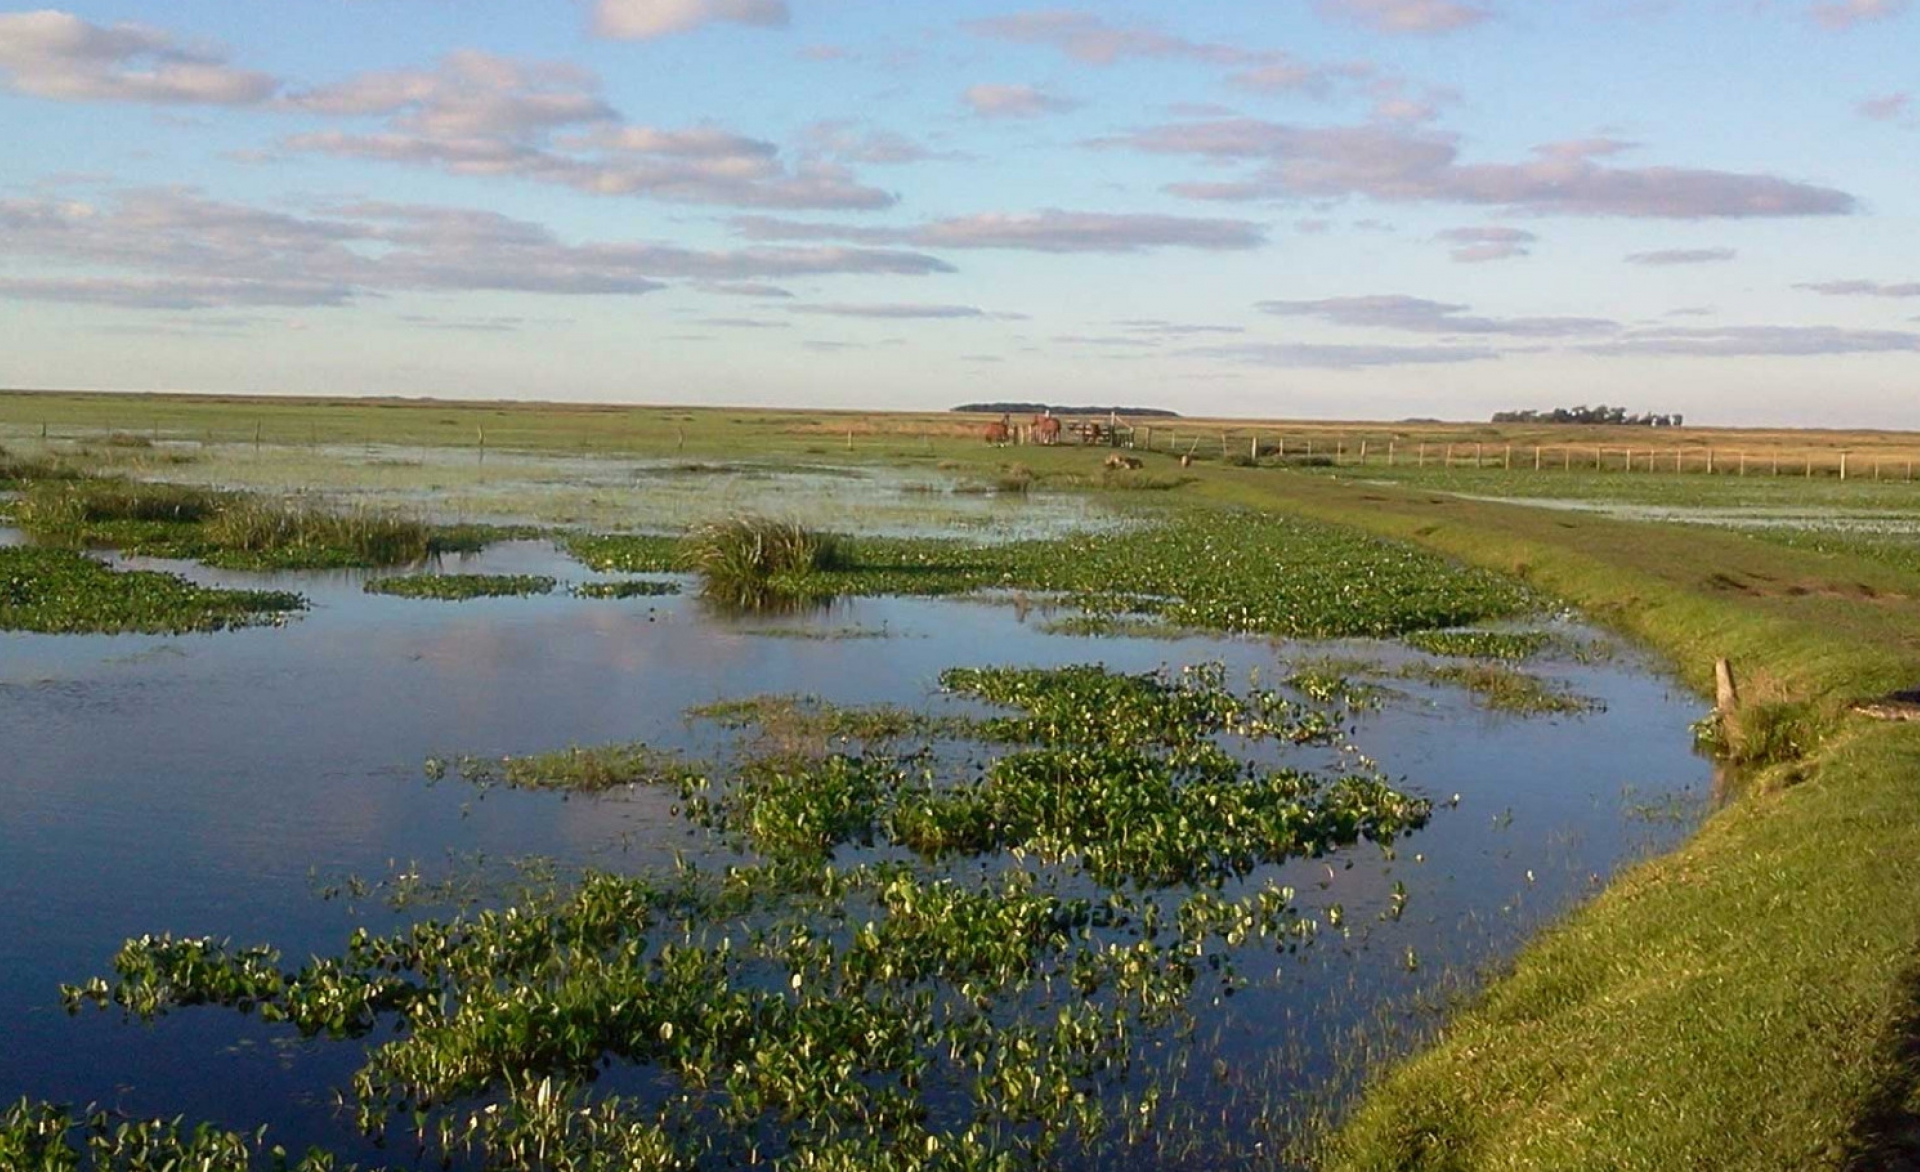 New reserve created in the Iberá Wetlands, Corrientes province